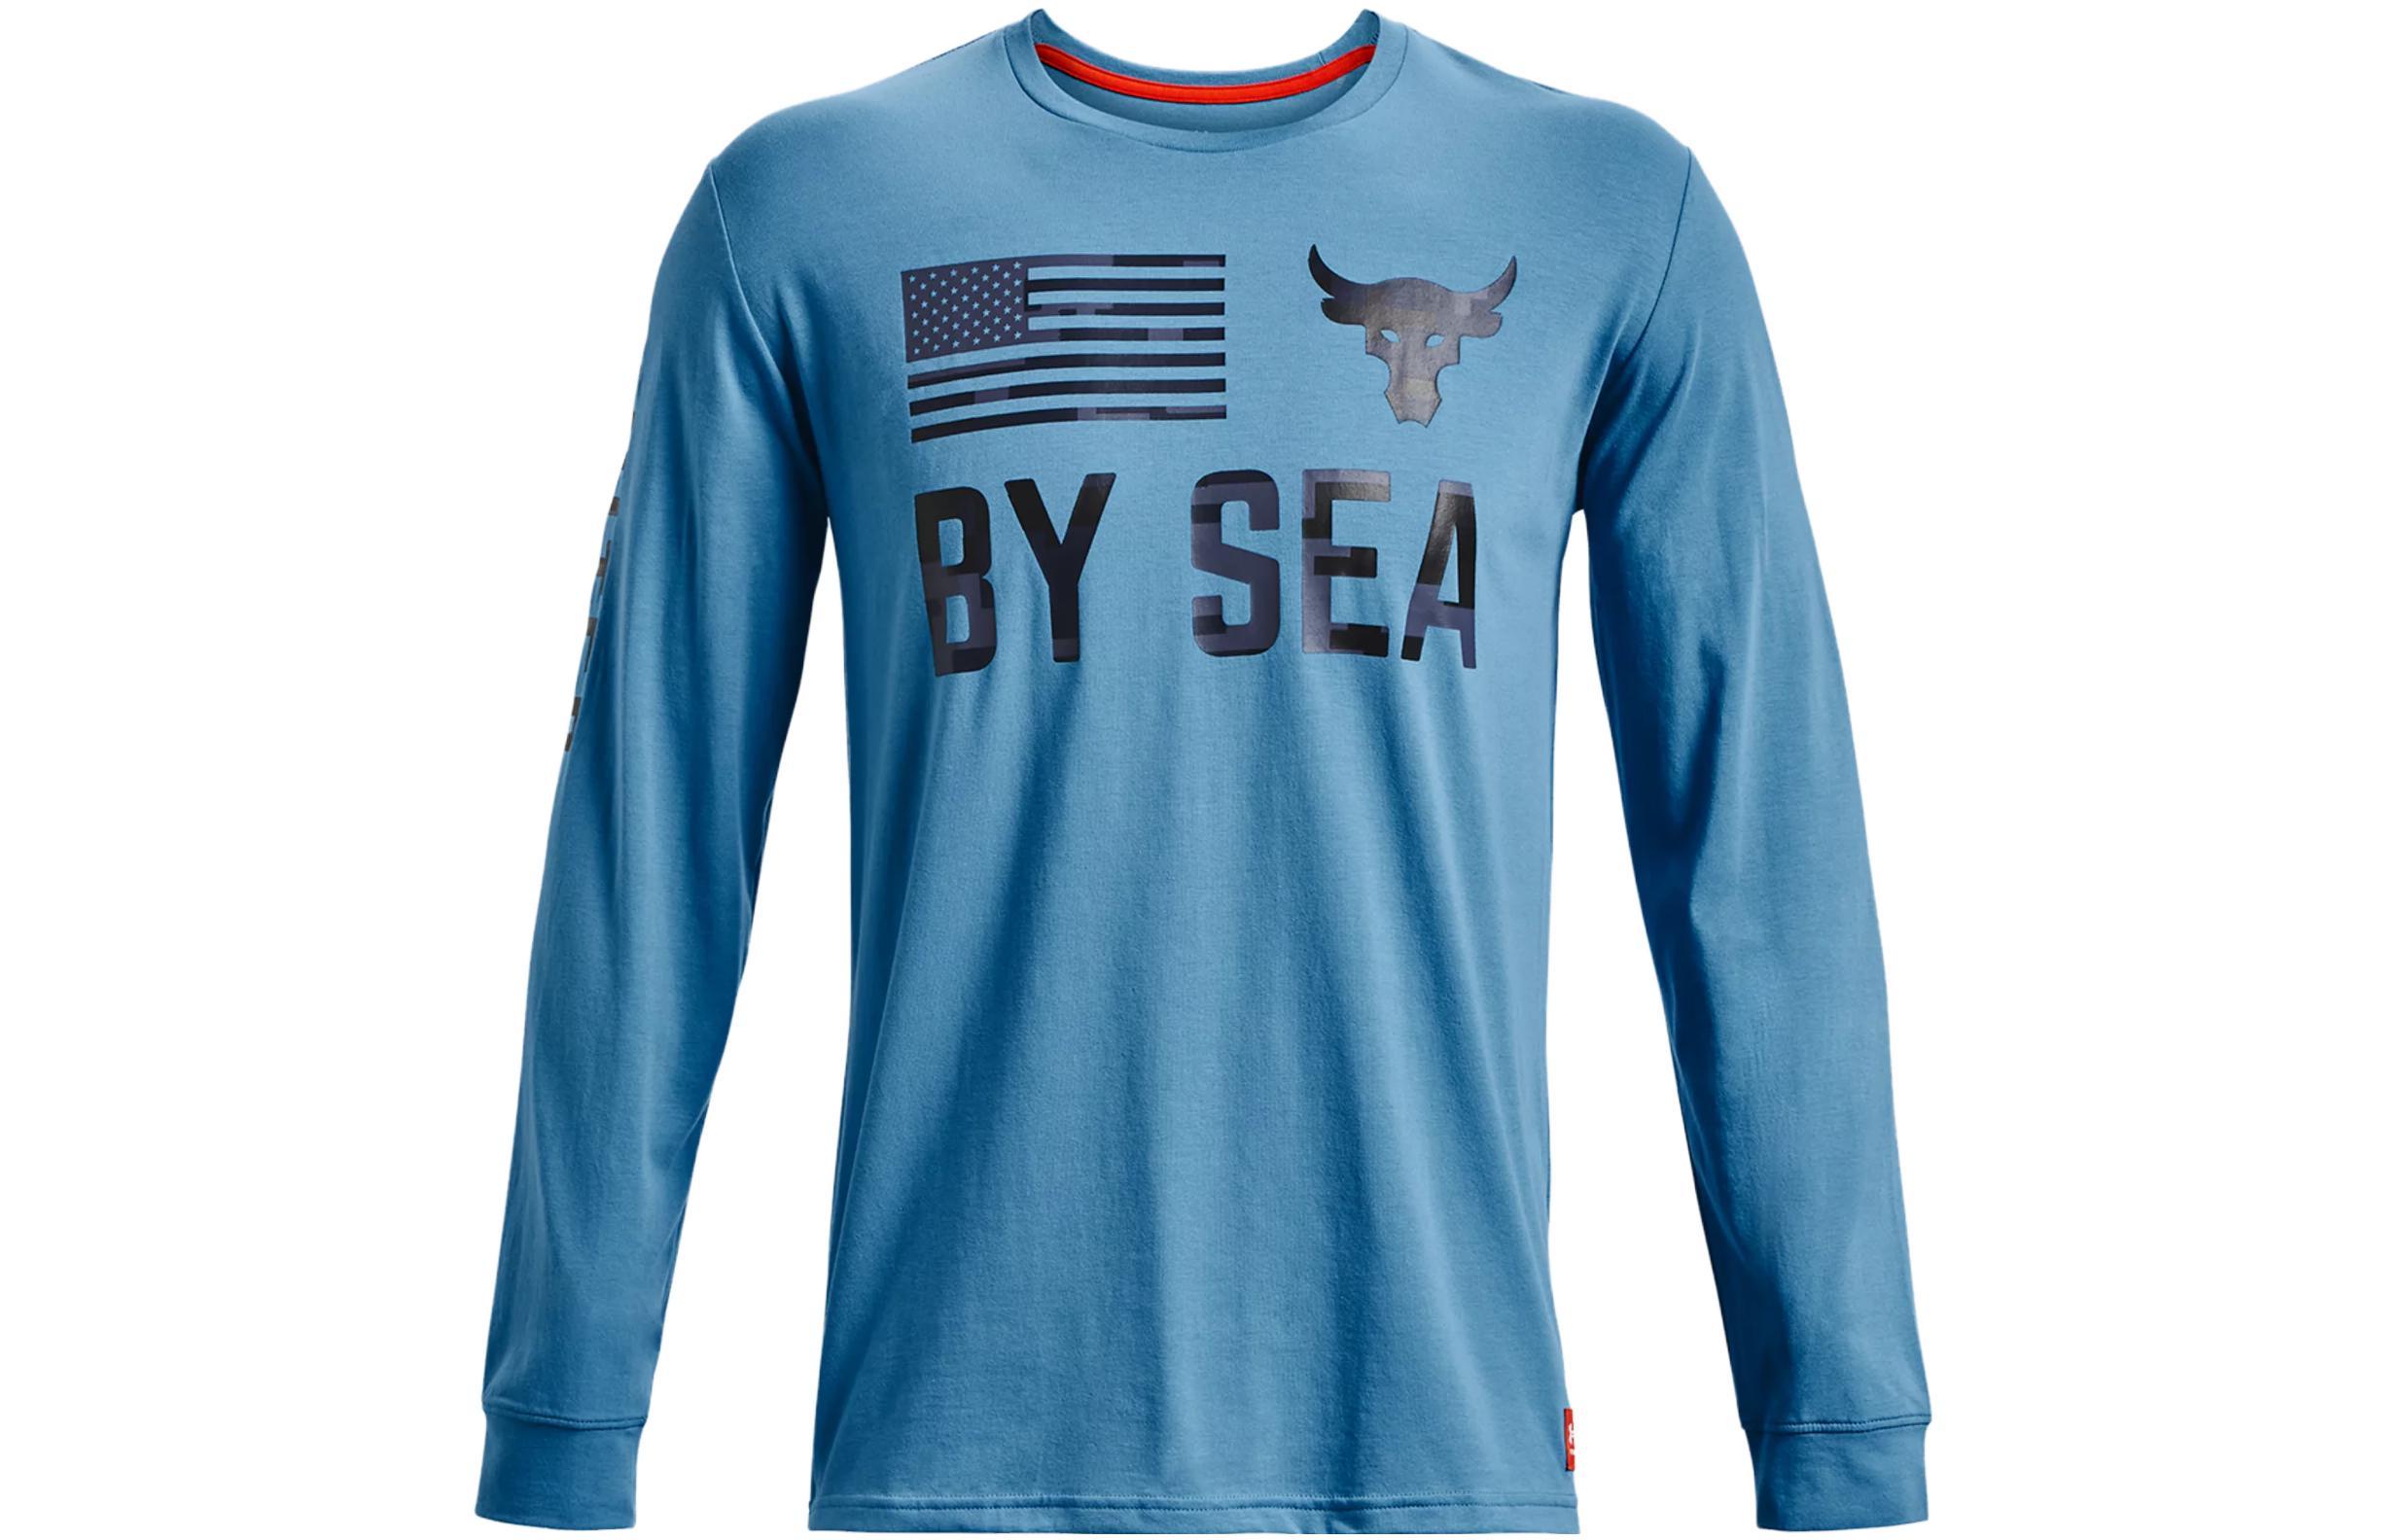 Under Armour Project Rock Veterans Day By Sea Long Sleeve T